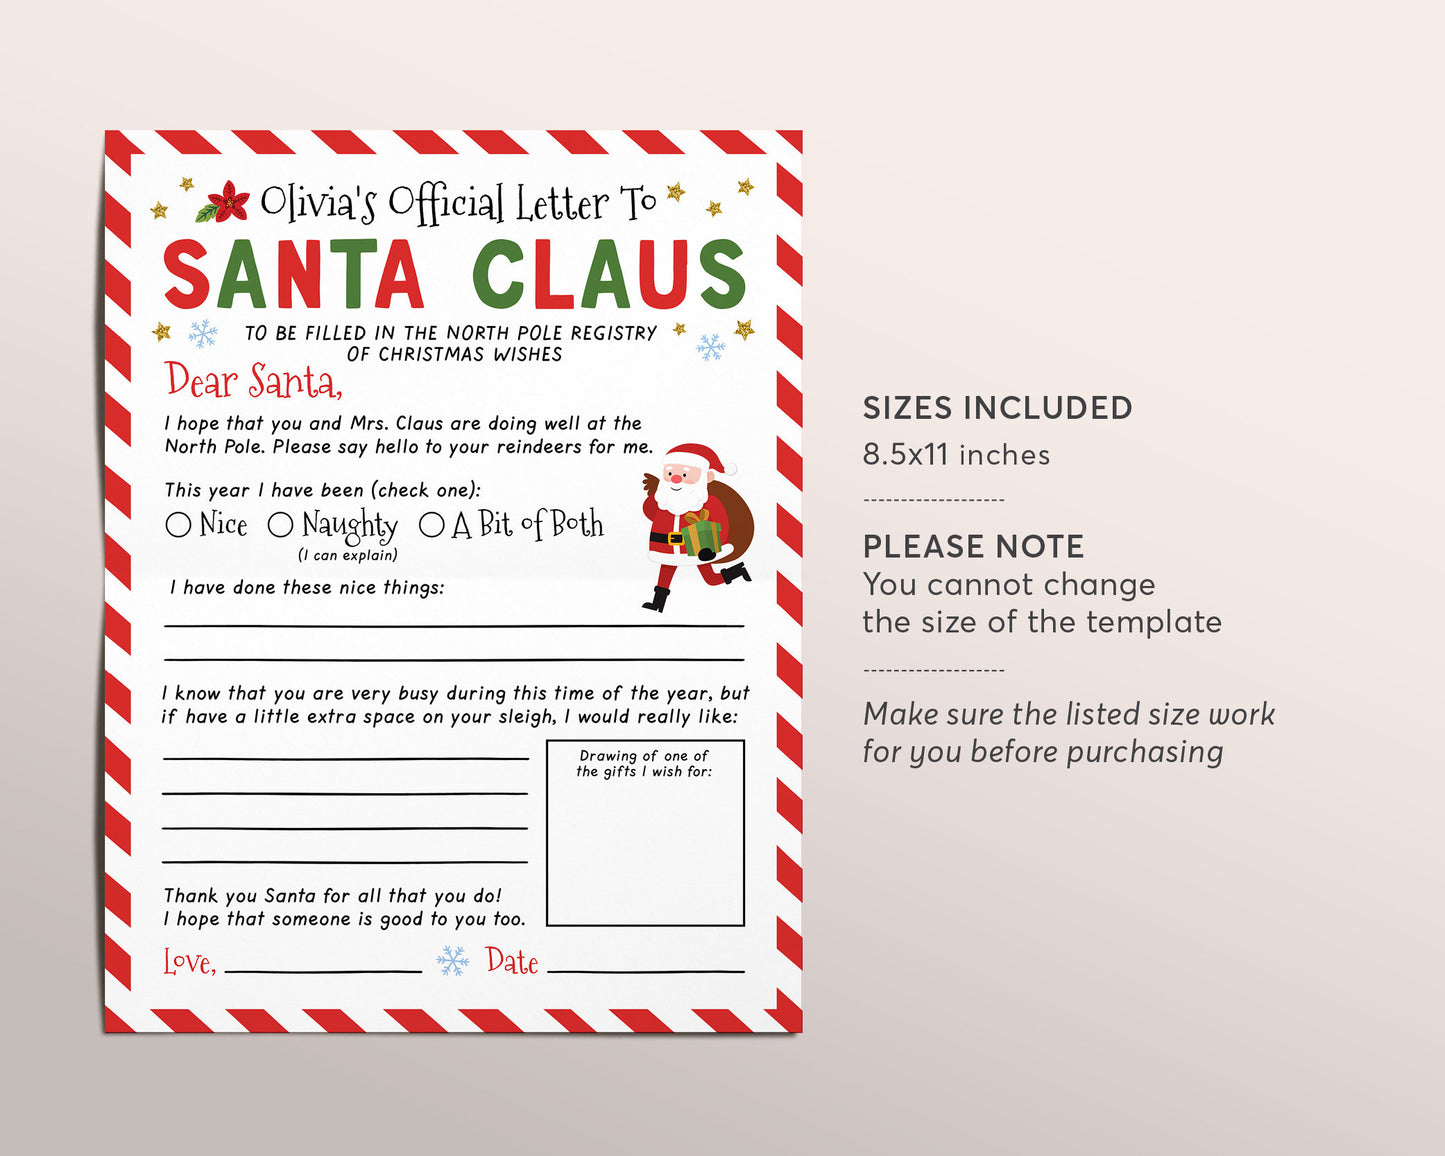 Letter to Santa Editable Template, Christmas Holidays Wish List for Kids, Personalized Dear Santa Letter, Christmas Traditions Activity Mail